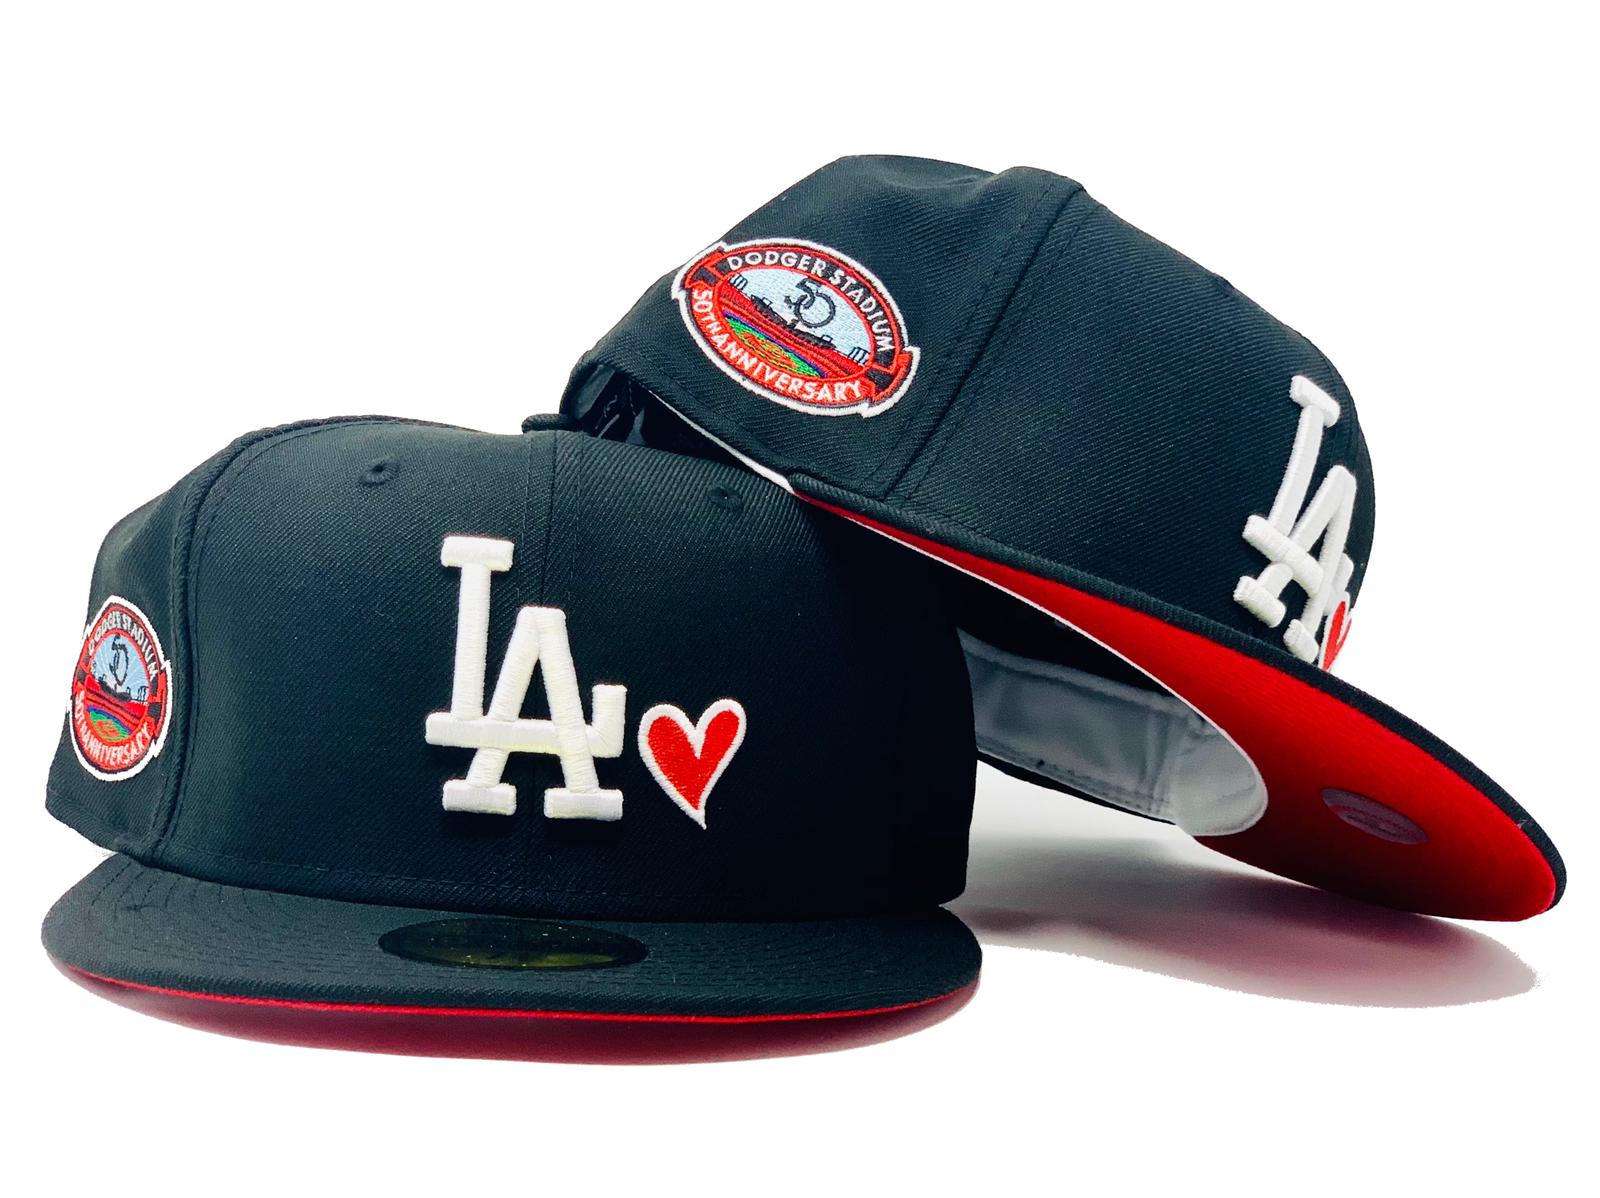 Dodgers Fitted New Era 59Fifty 50th Stadium Black Red Cap Hat Pink